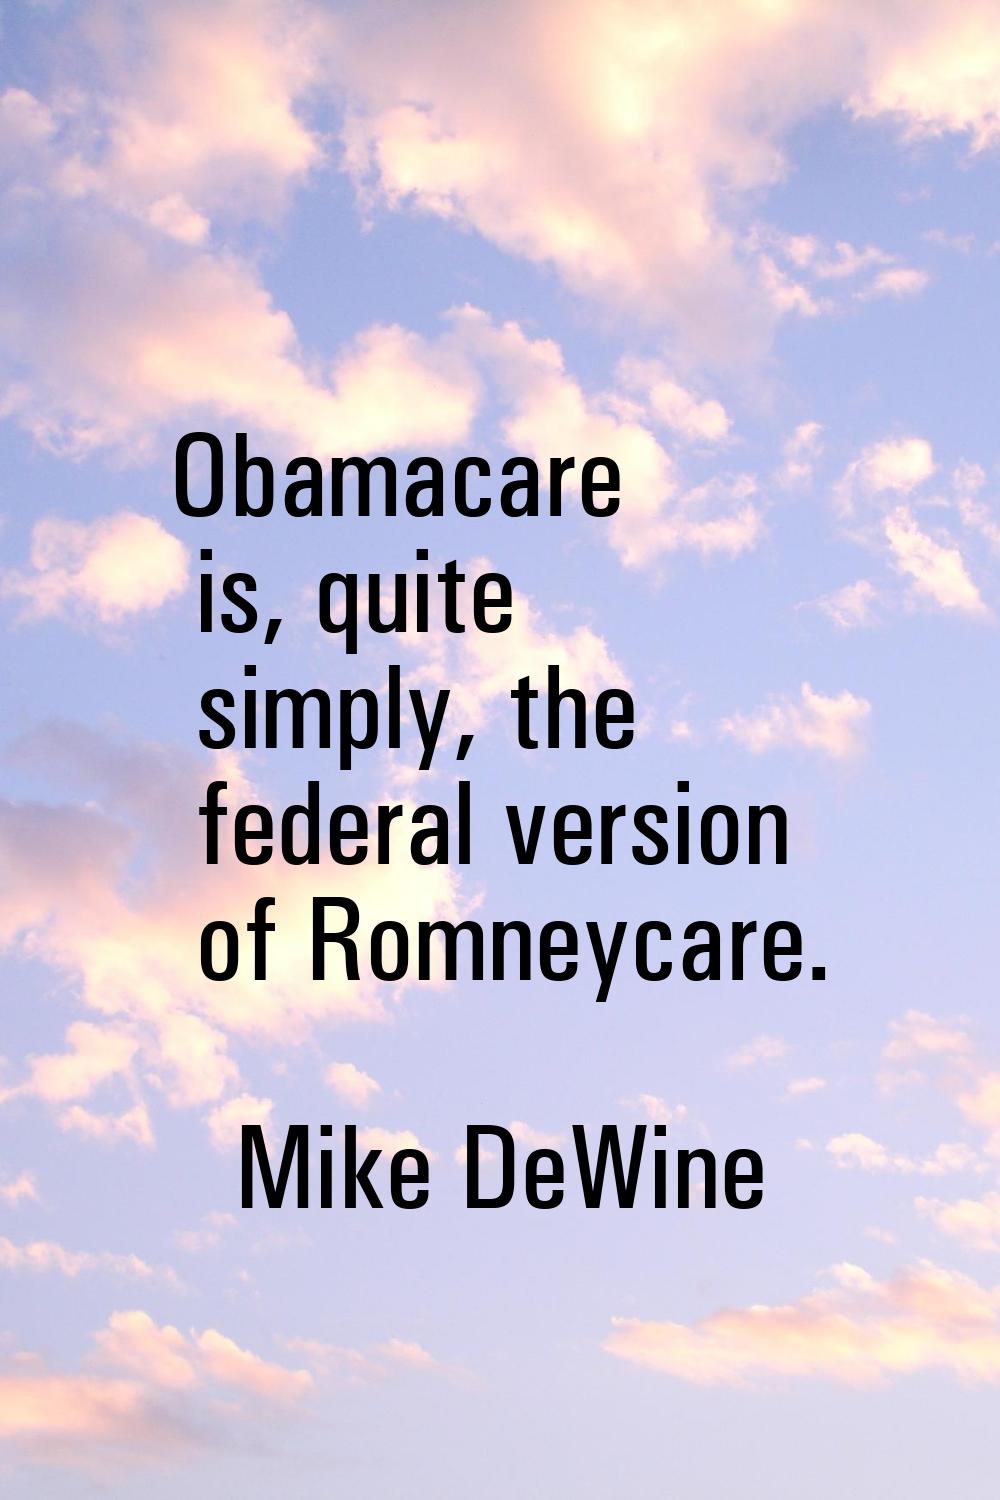 Obamacare is, quite simply, the federal version of Romneycare.